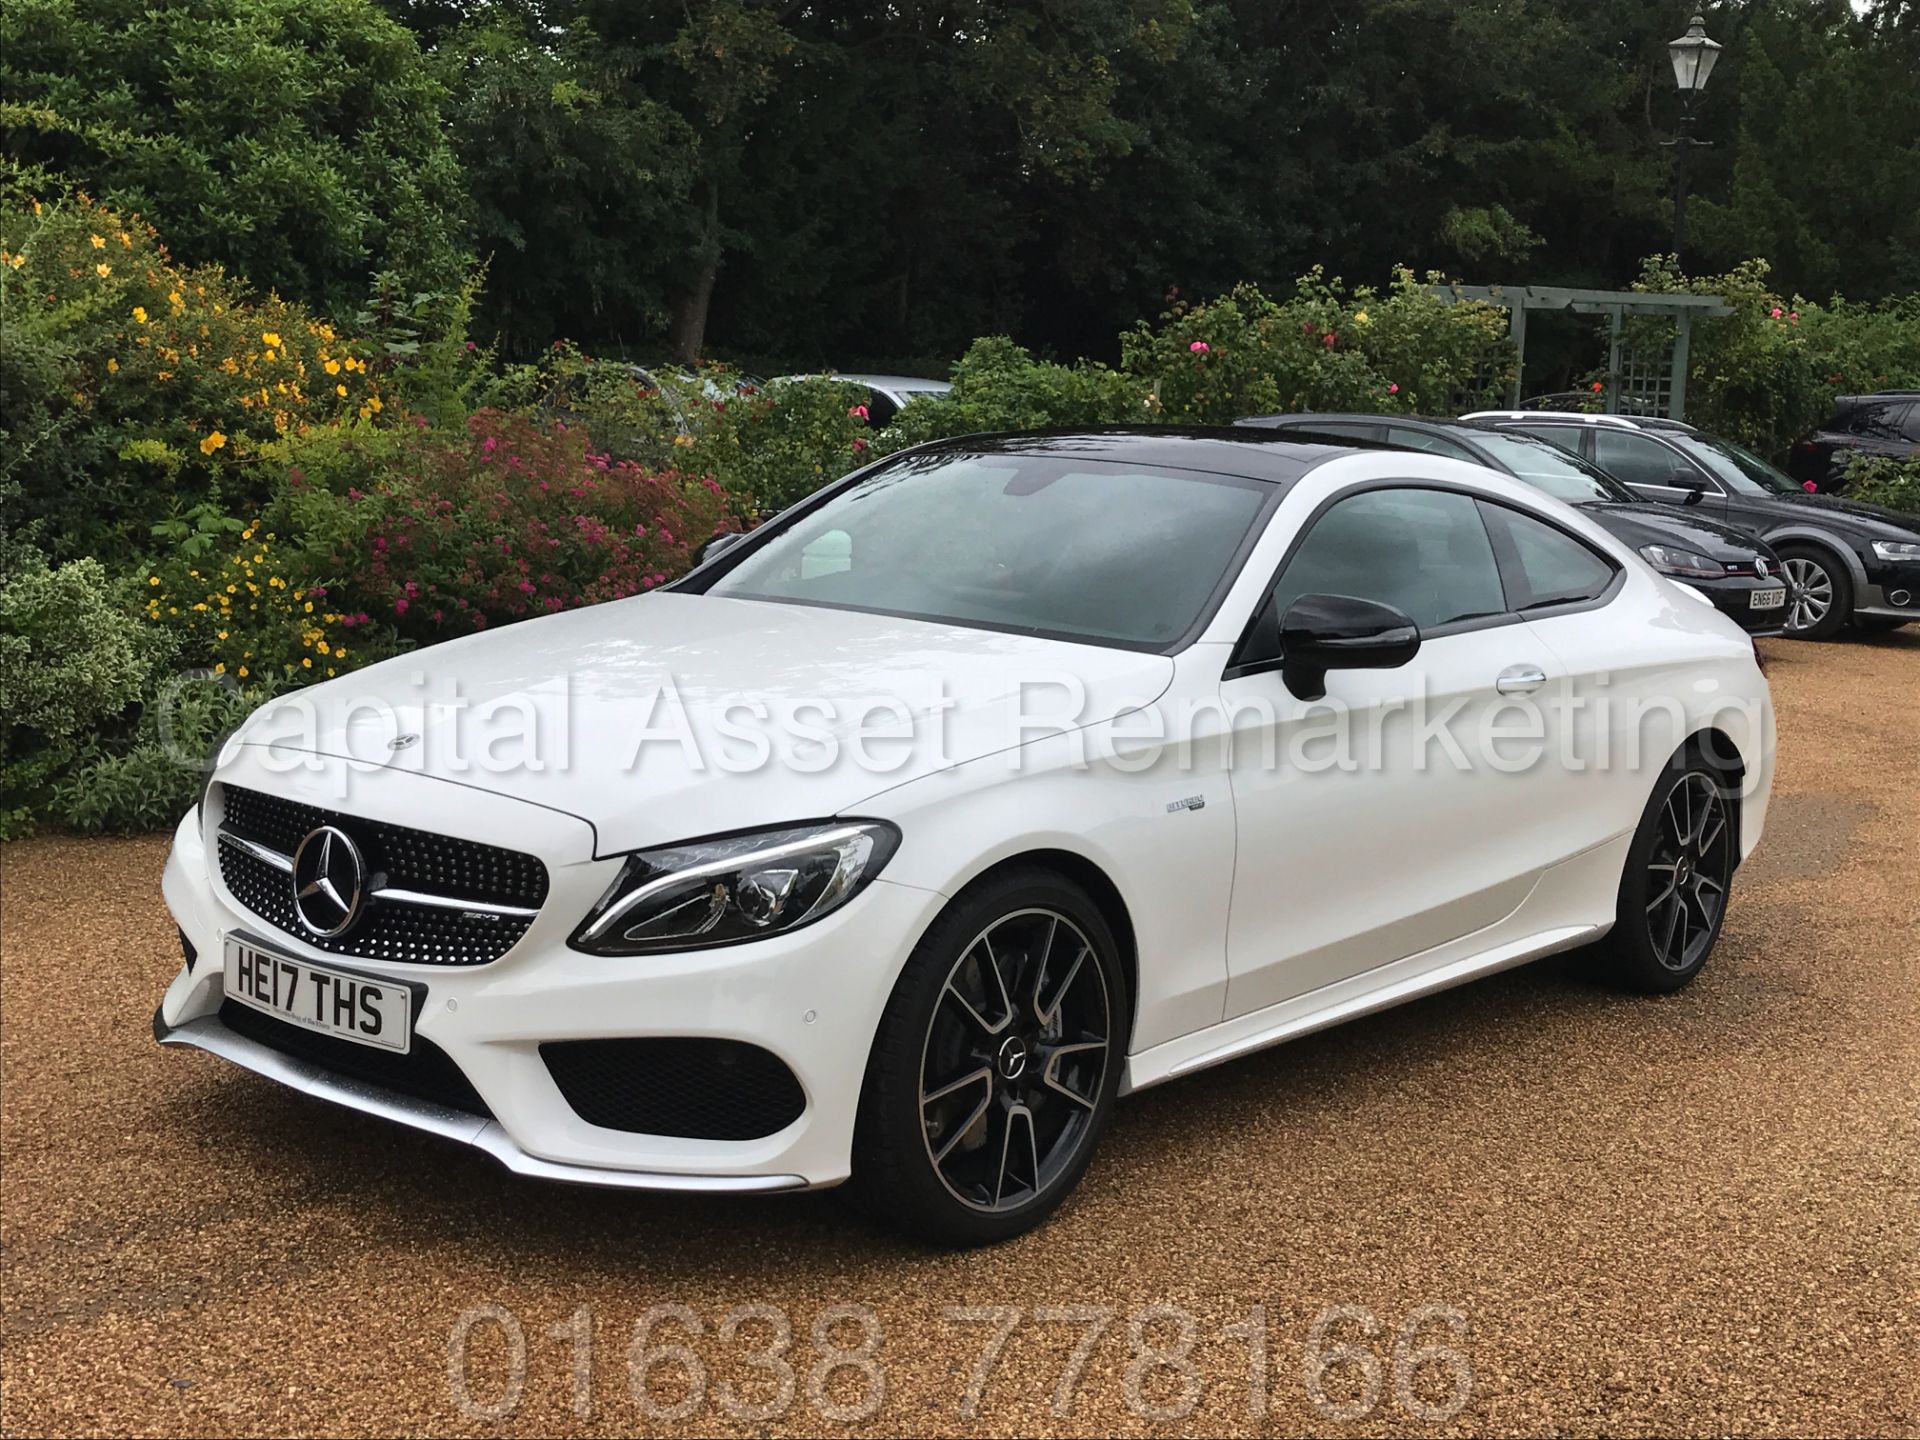 MEREDES-BENZ C43 AMG PREMIUM '4 MATIC' COUPE (2017) '9-G AUTO - LEATHER - SAT NAV' **FULLY LOADED** - Image 8 of 57